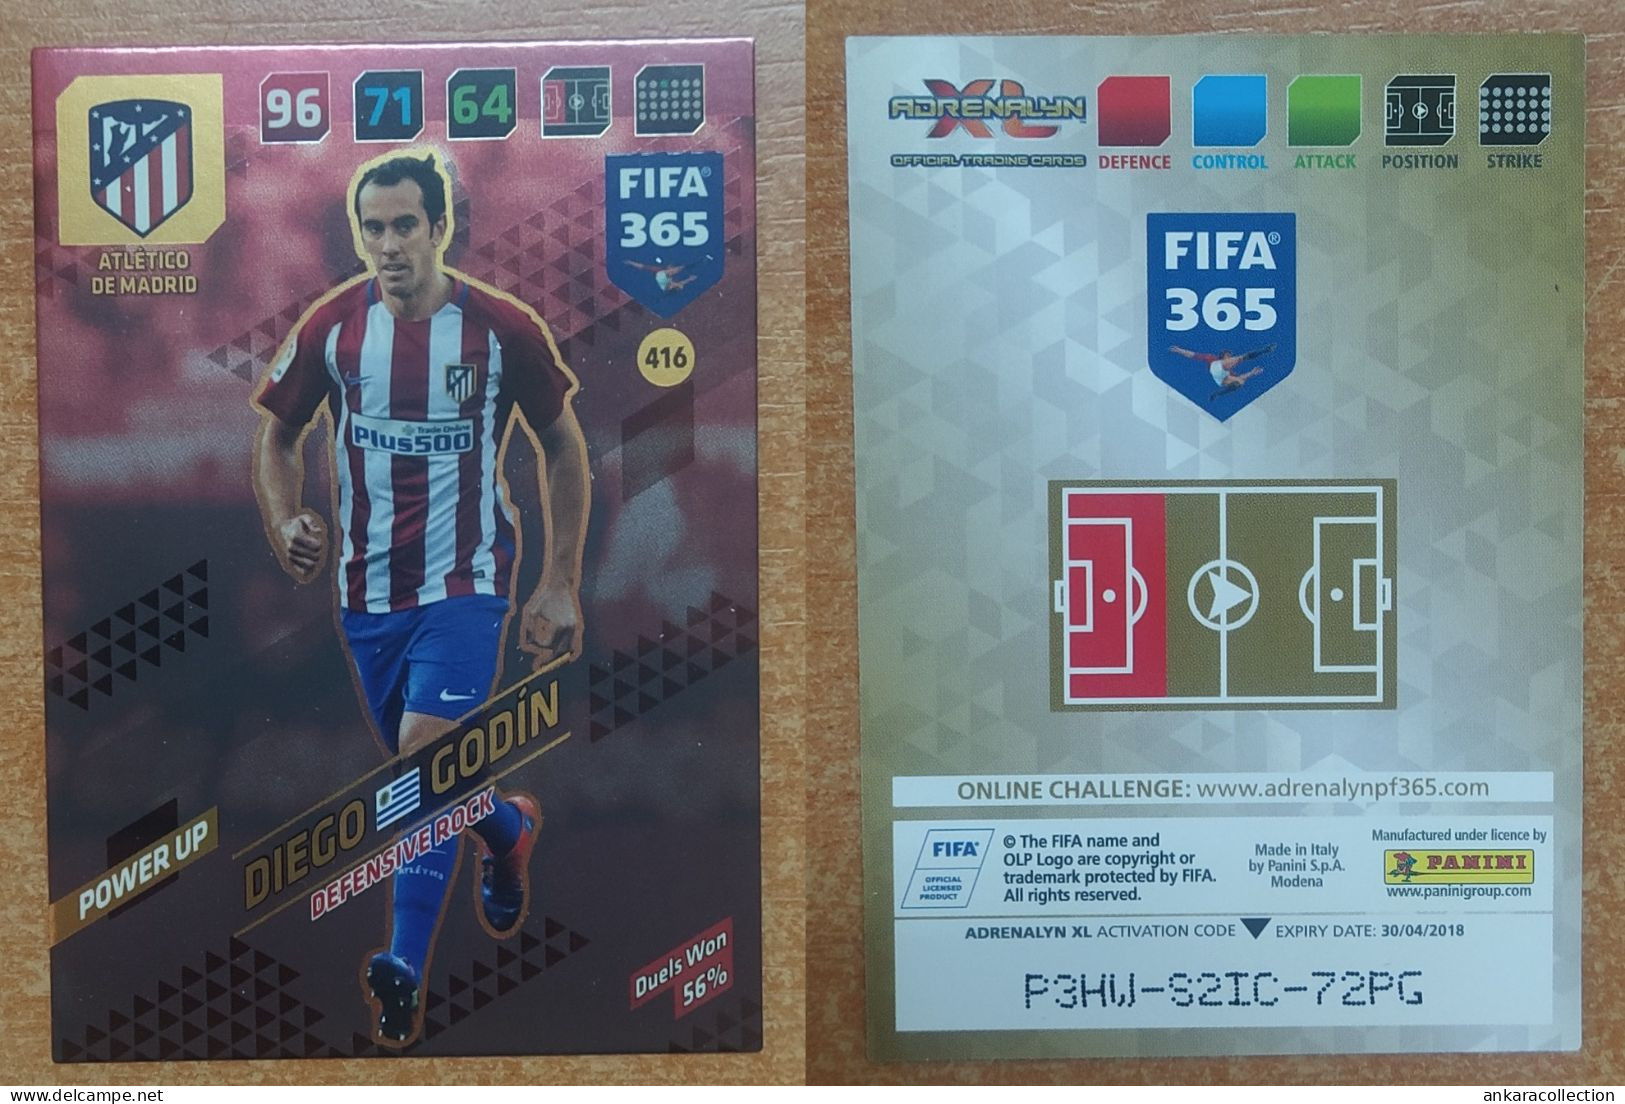 AC - 416 DIEGO GODIN  ATLETICO DE MADRID  POWER UP DEFENSIVE ROCK  DUELS WON  PANINI FIFA 365 2018 ADRENALYN TRADING CAR - Trading Cards